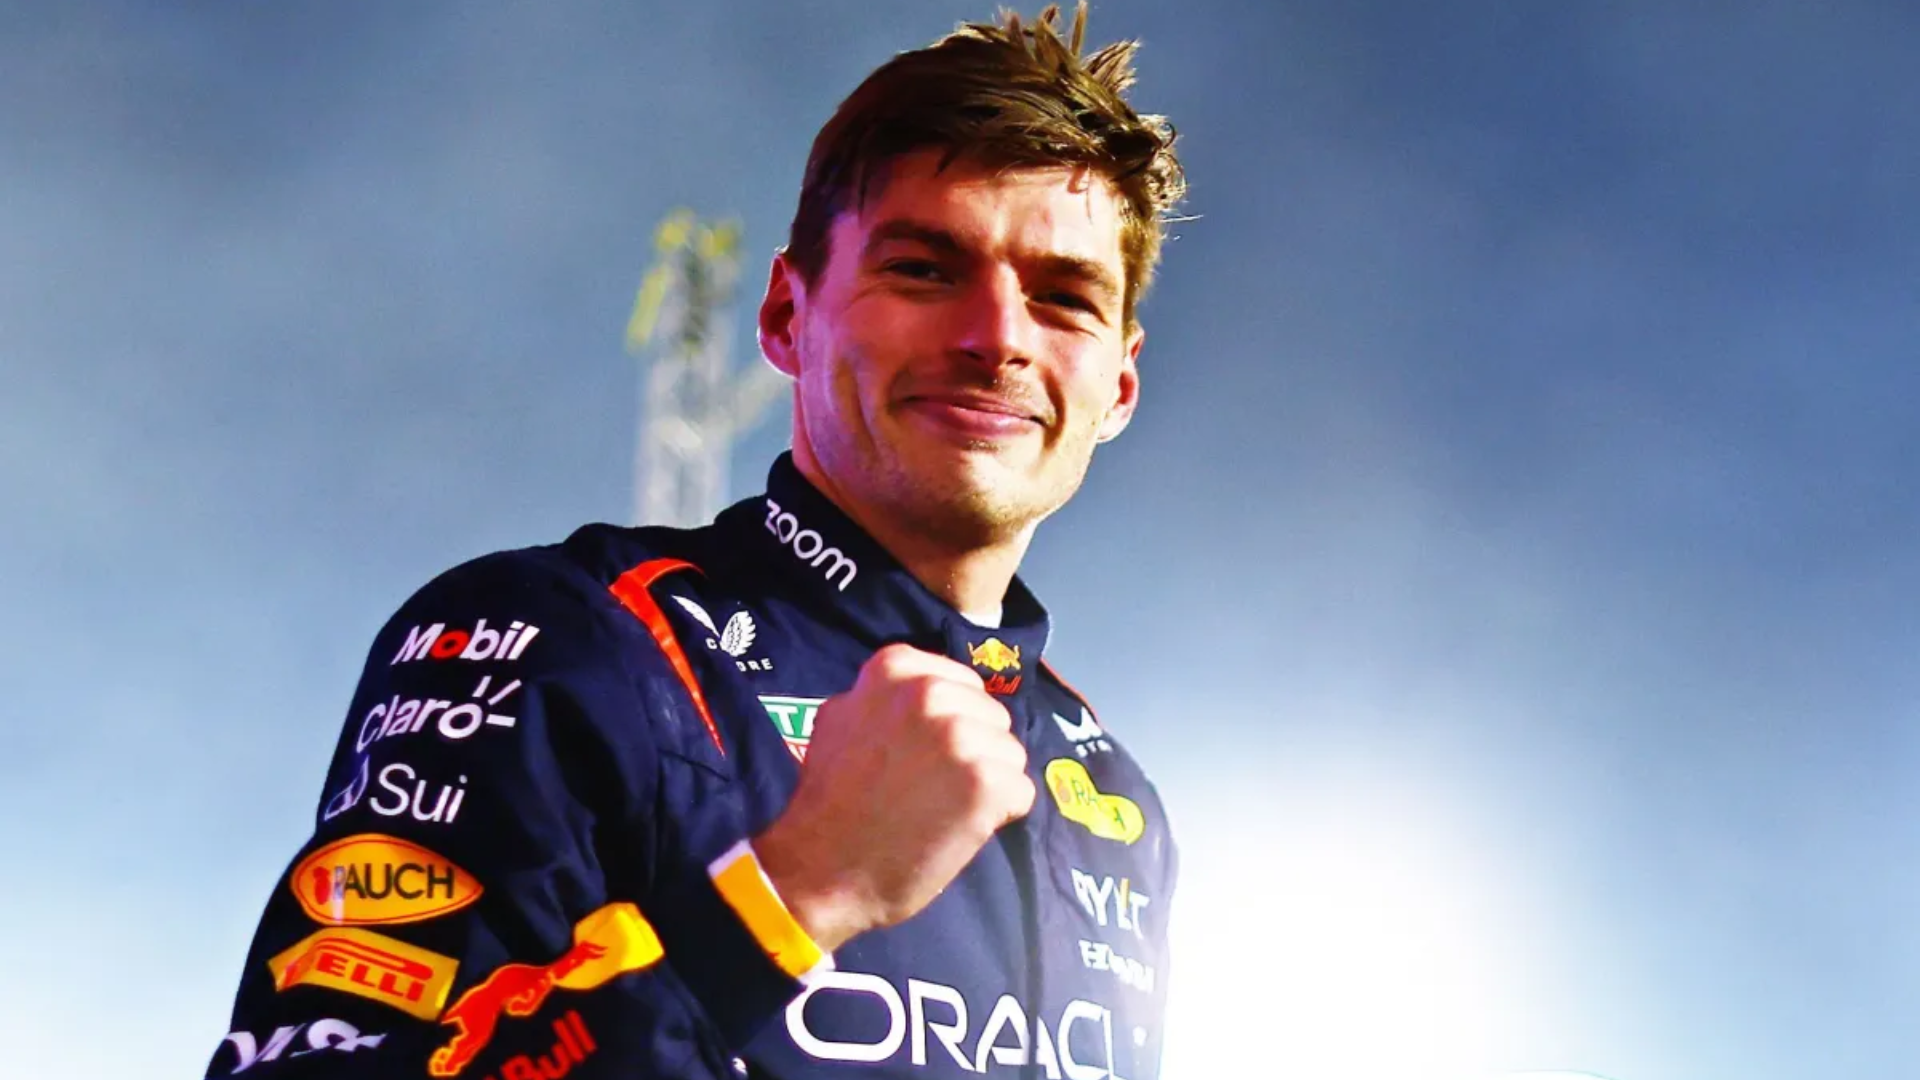 Japanese Grand Prix Qualifying: Max Verstappen Secures Pole Position After Beating Sergio Perez By Just 0.066 seconds